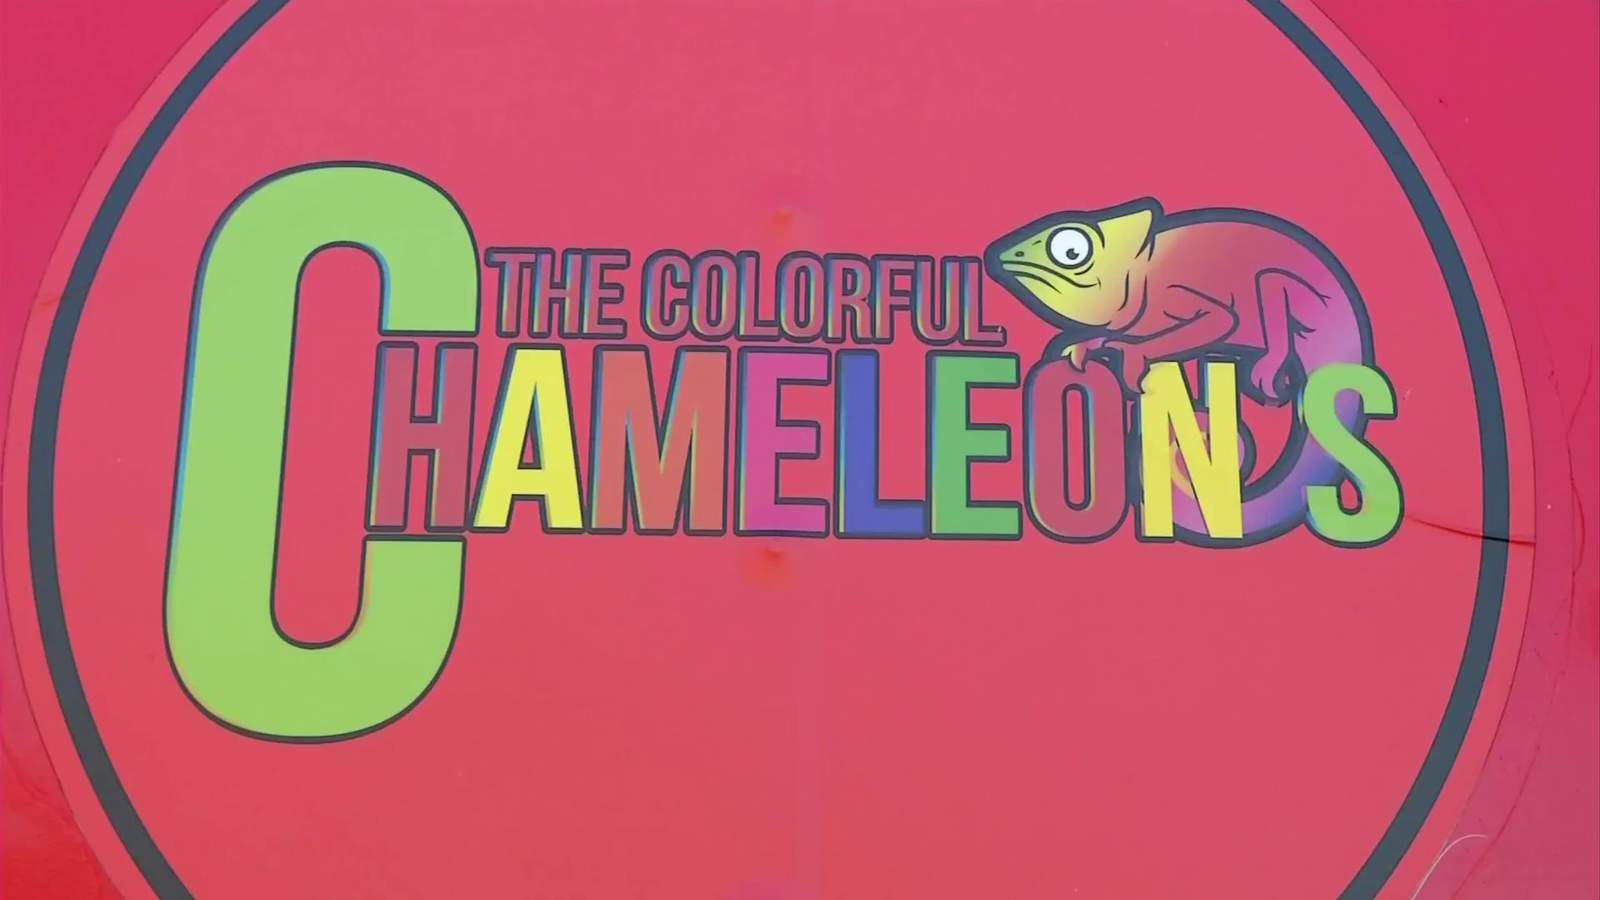 Tasty Tuesday: The Colorful Chameleon brings home cookin’ to the Alleghany Highlands